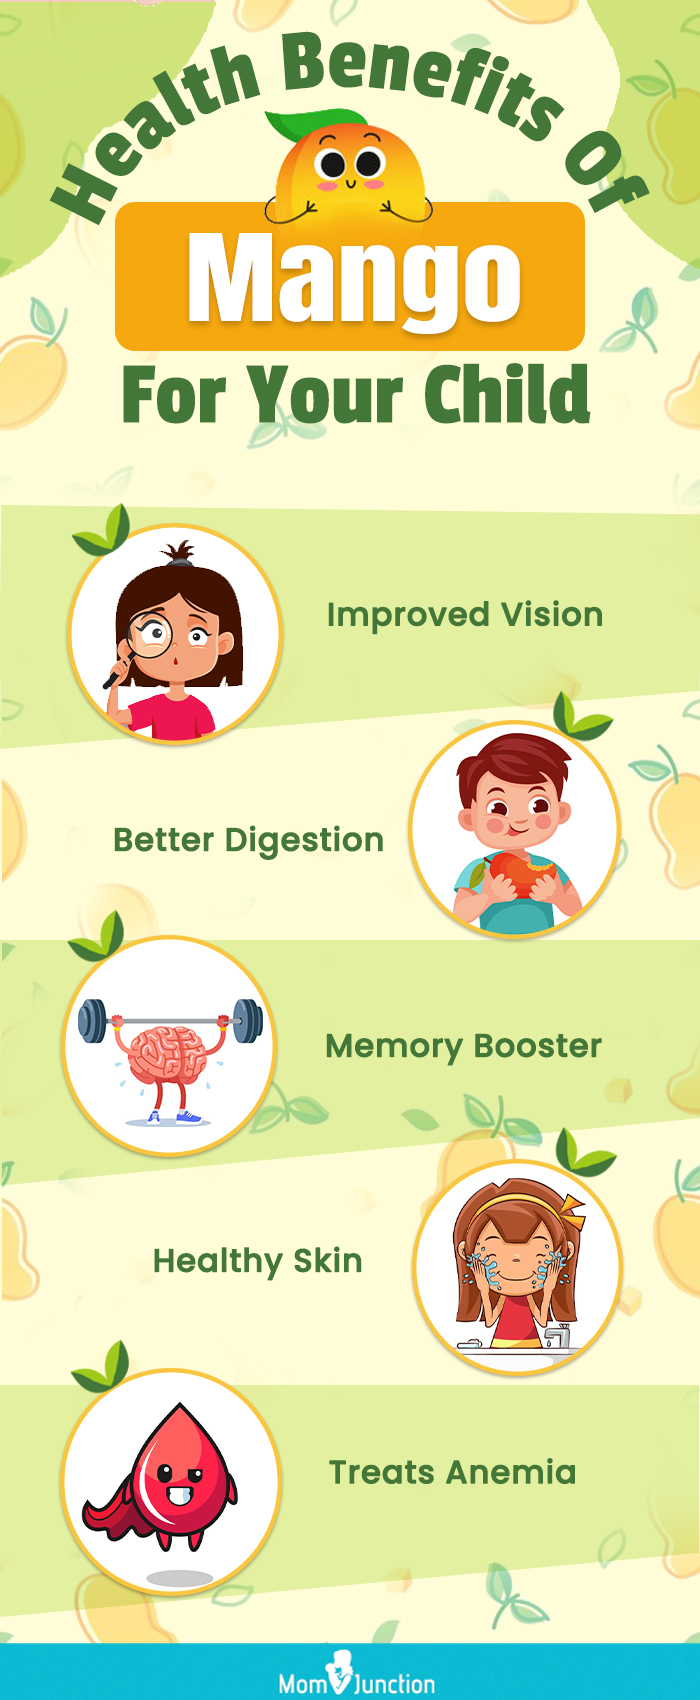 health benefits of mango for your child (infographic)